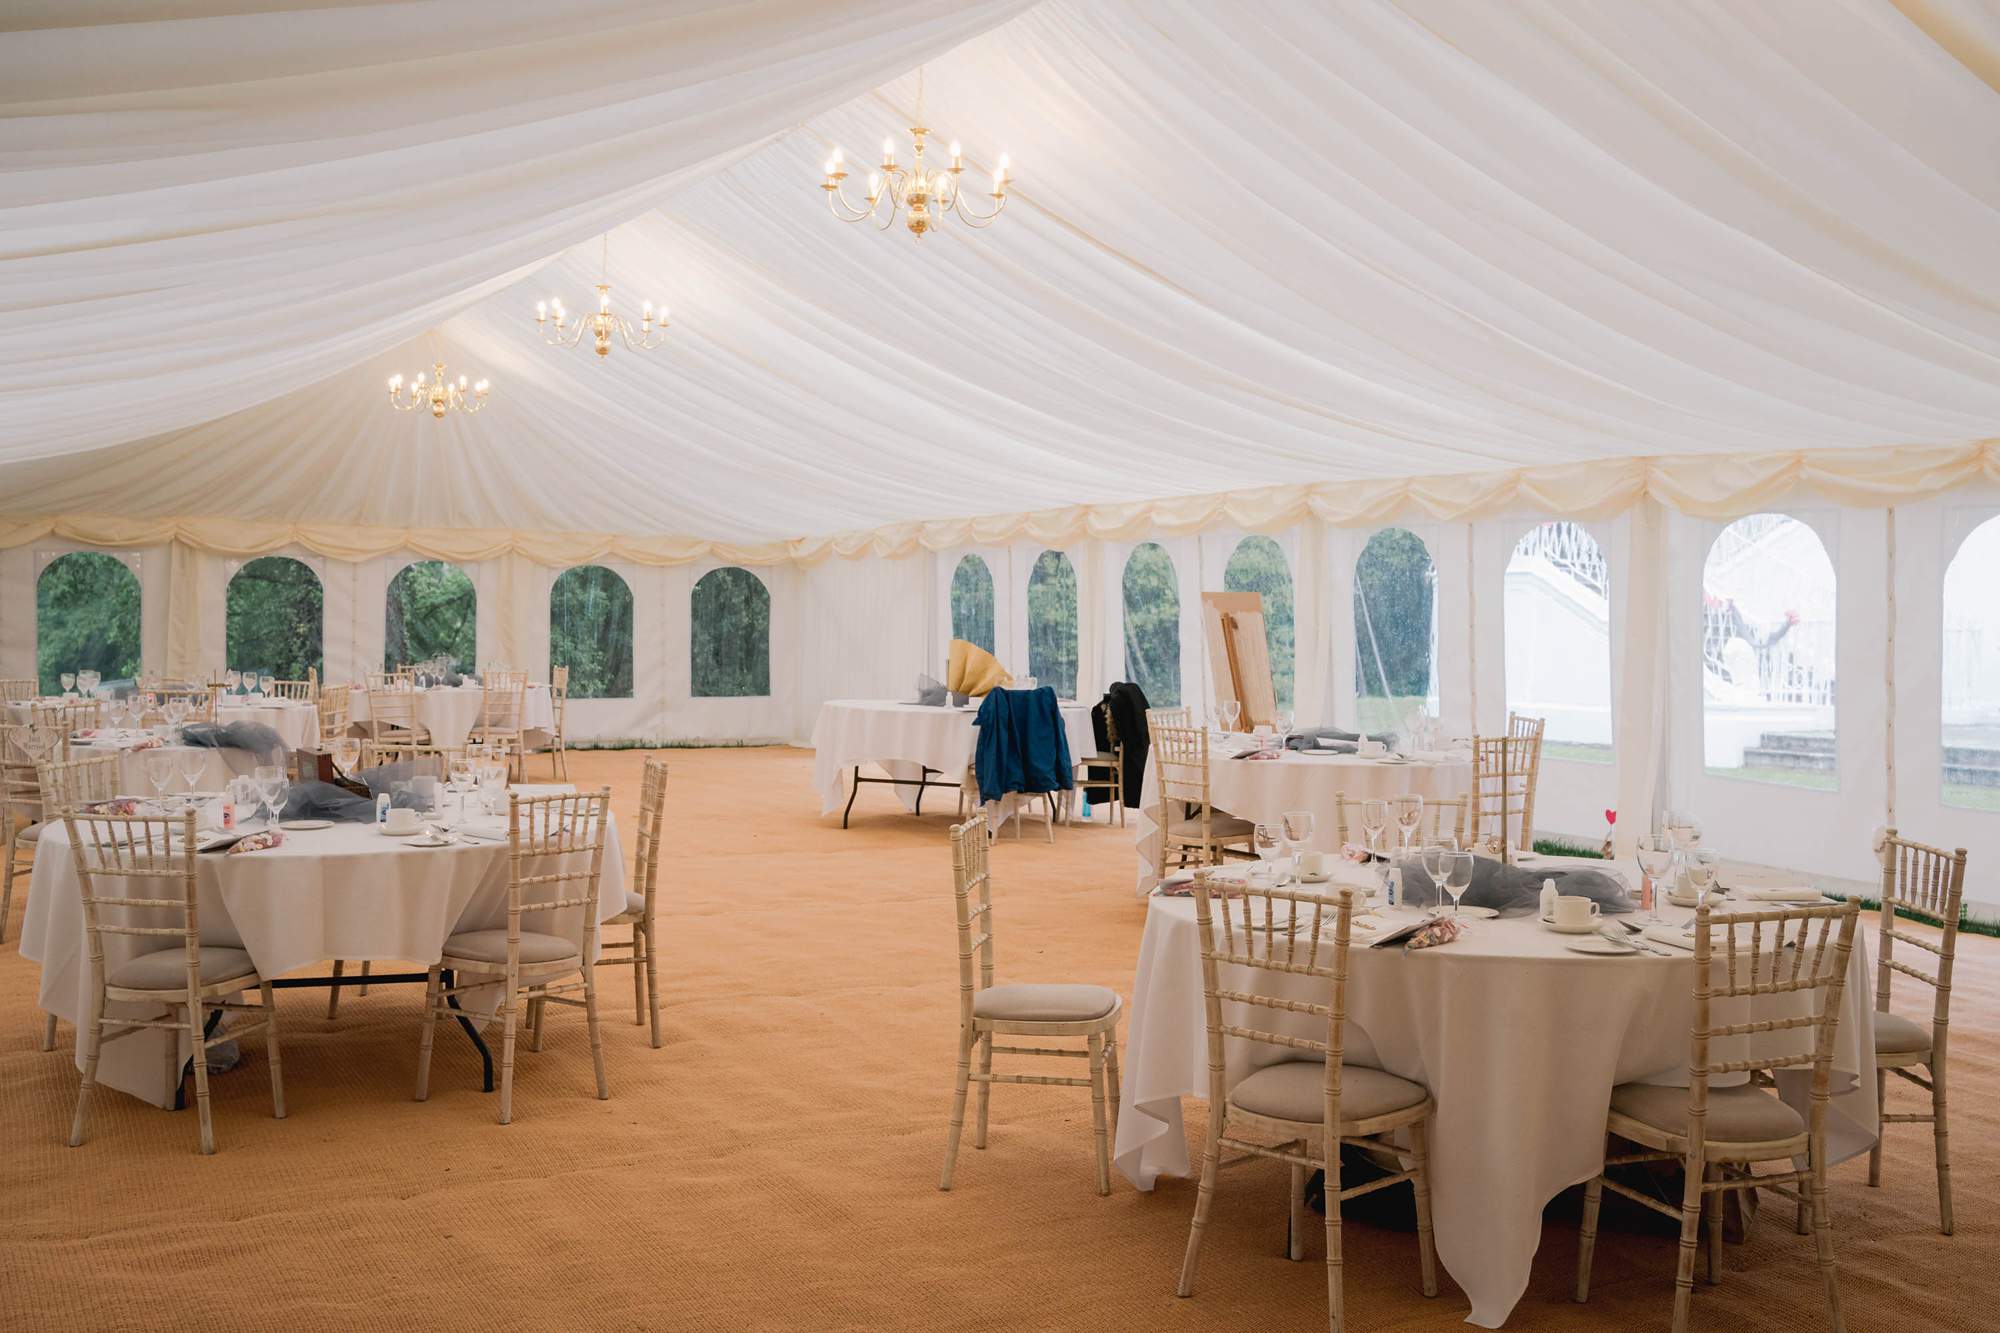 Wedding marquee at Castle Goring in Sussex.